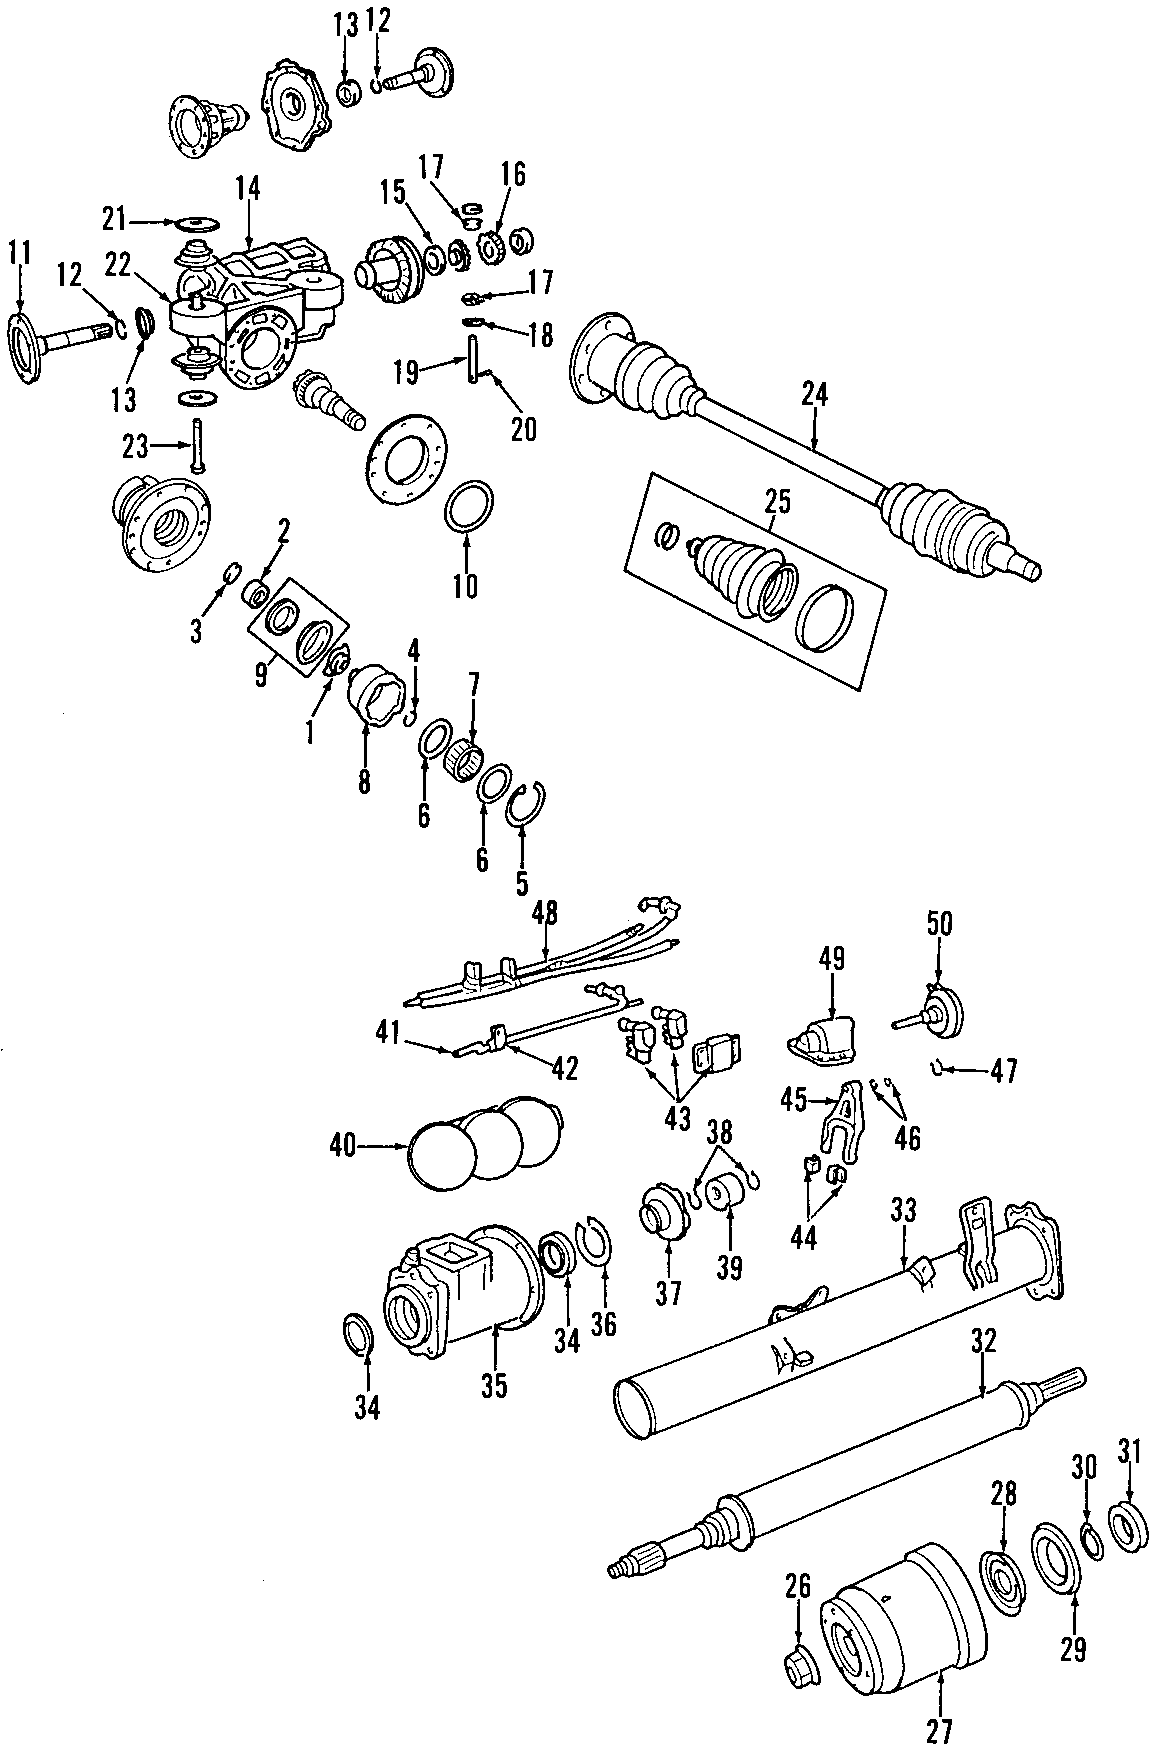 6DRIVE AXLES. REAR AXLE. AXLE SHAFTS & JOINTS. DIFFERENTIAL. PROPELLER SHAFT.https://images.simplepart.com/images/parts/motor/fullsize/T040085.png